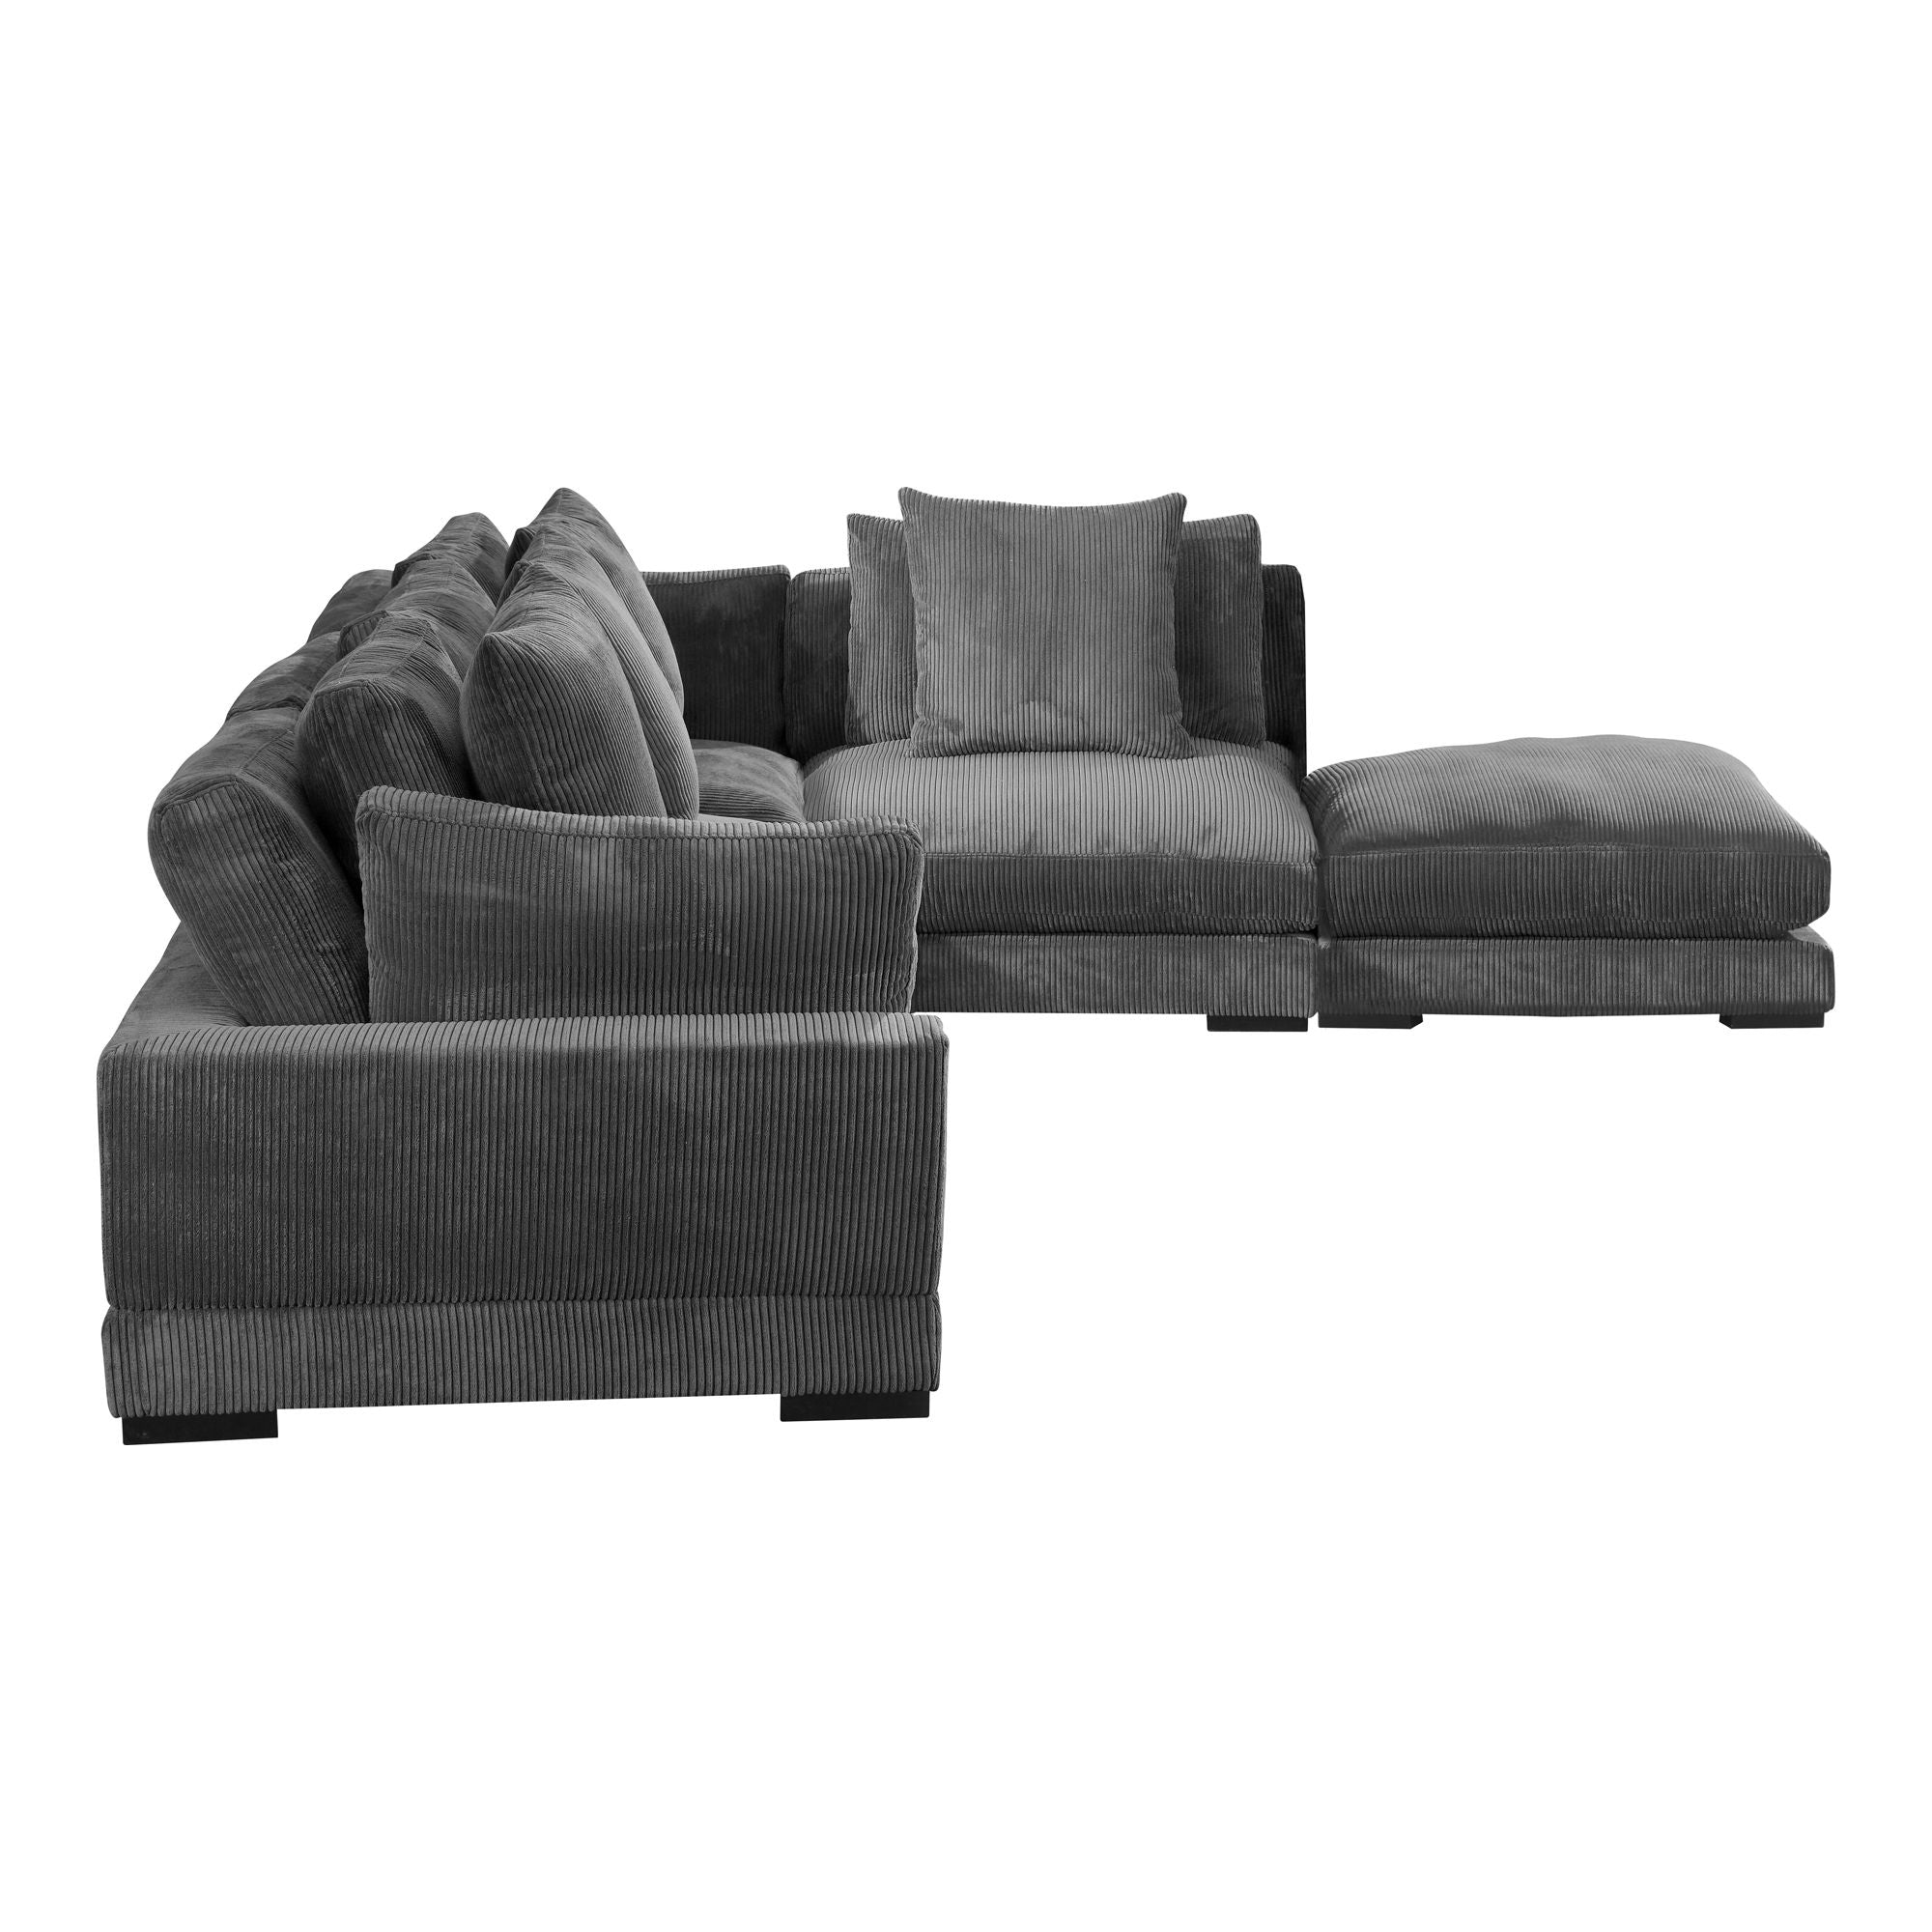 Charcoal Gray Corduroy Modular Sectional - Tumble Dream-Stationary Sectionals-American Furniture Outlet